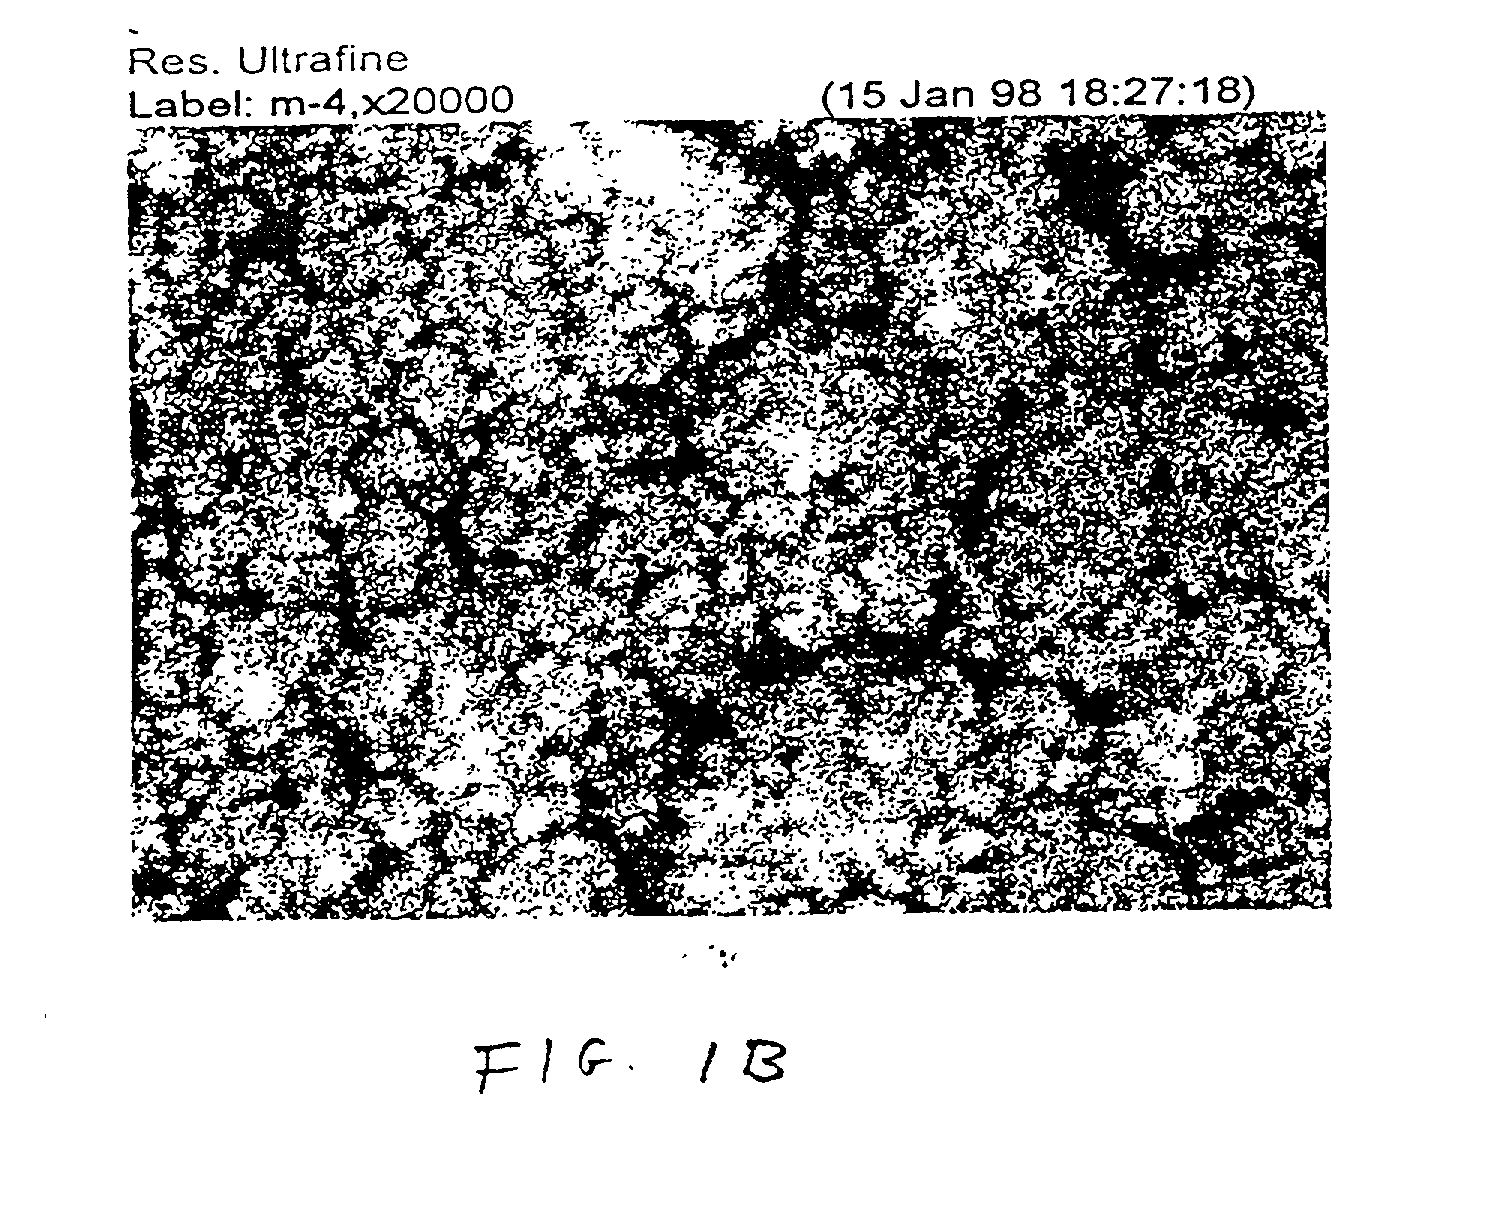 Method for producing high surface area foil electrodes